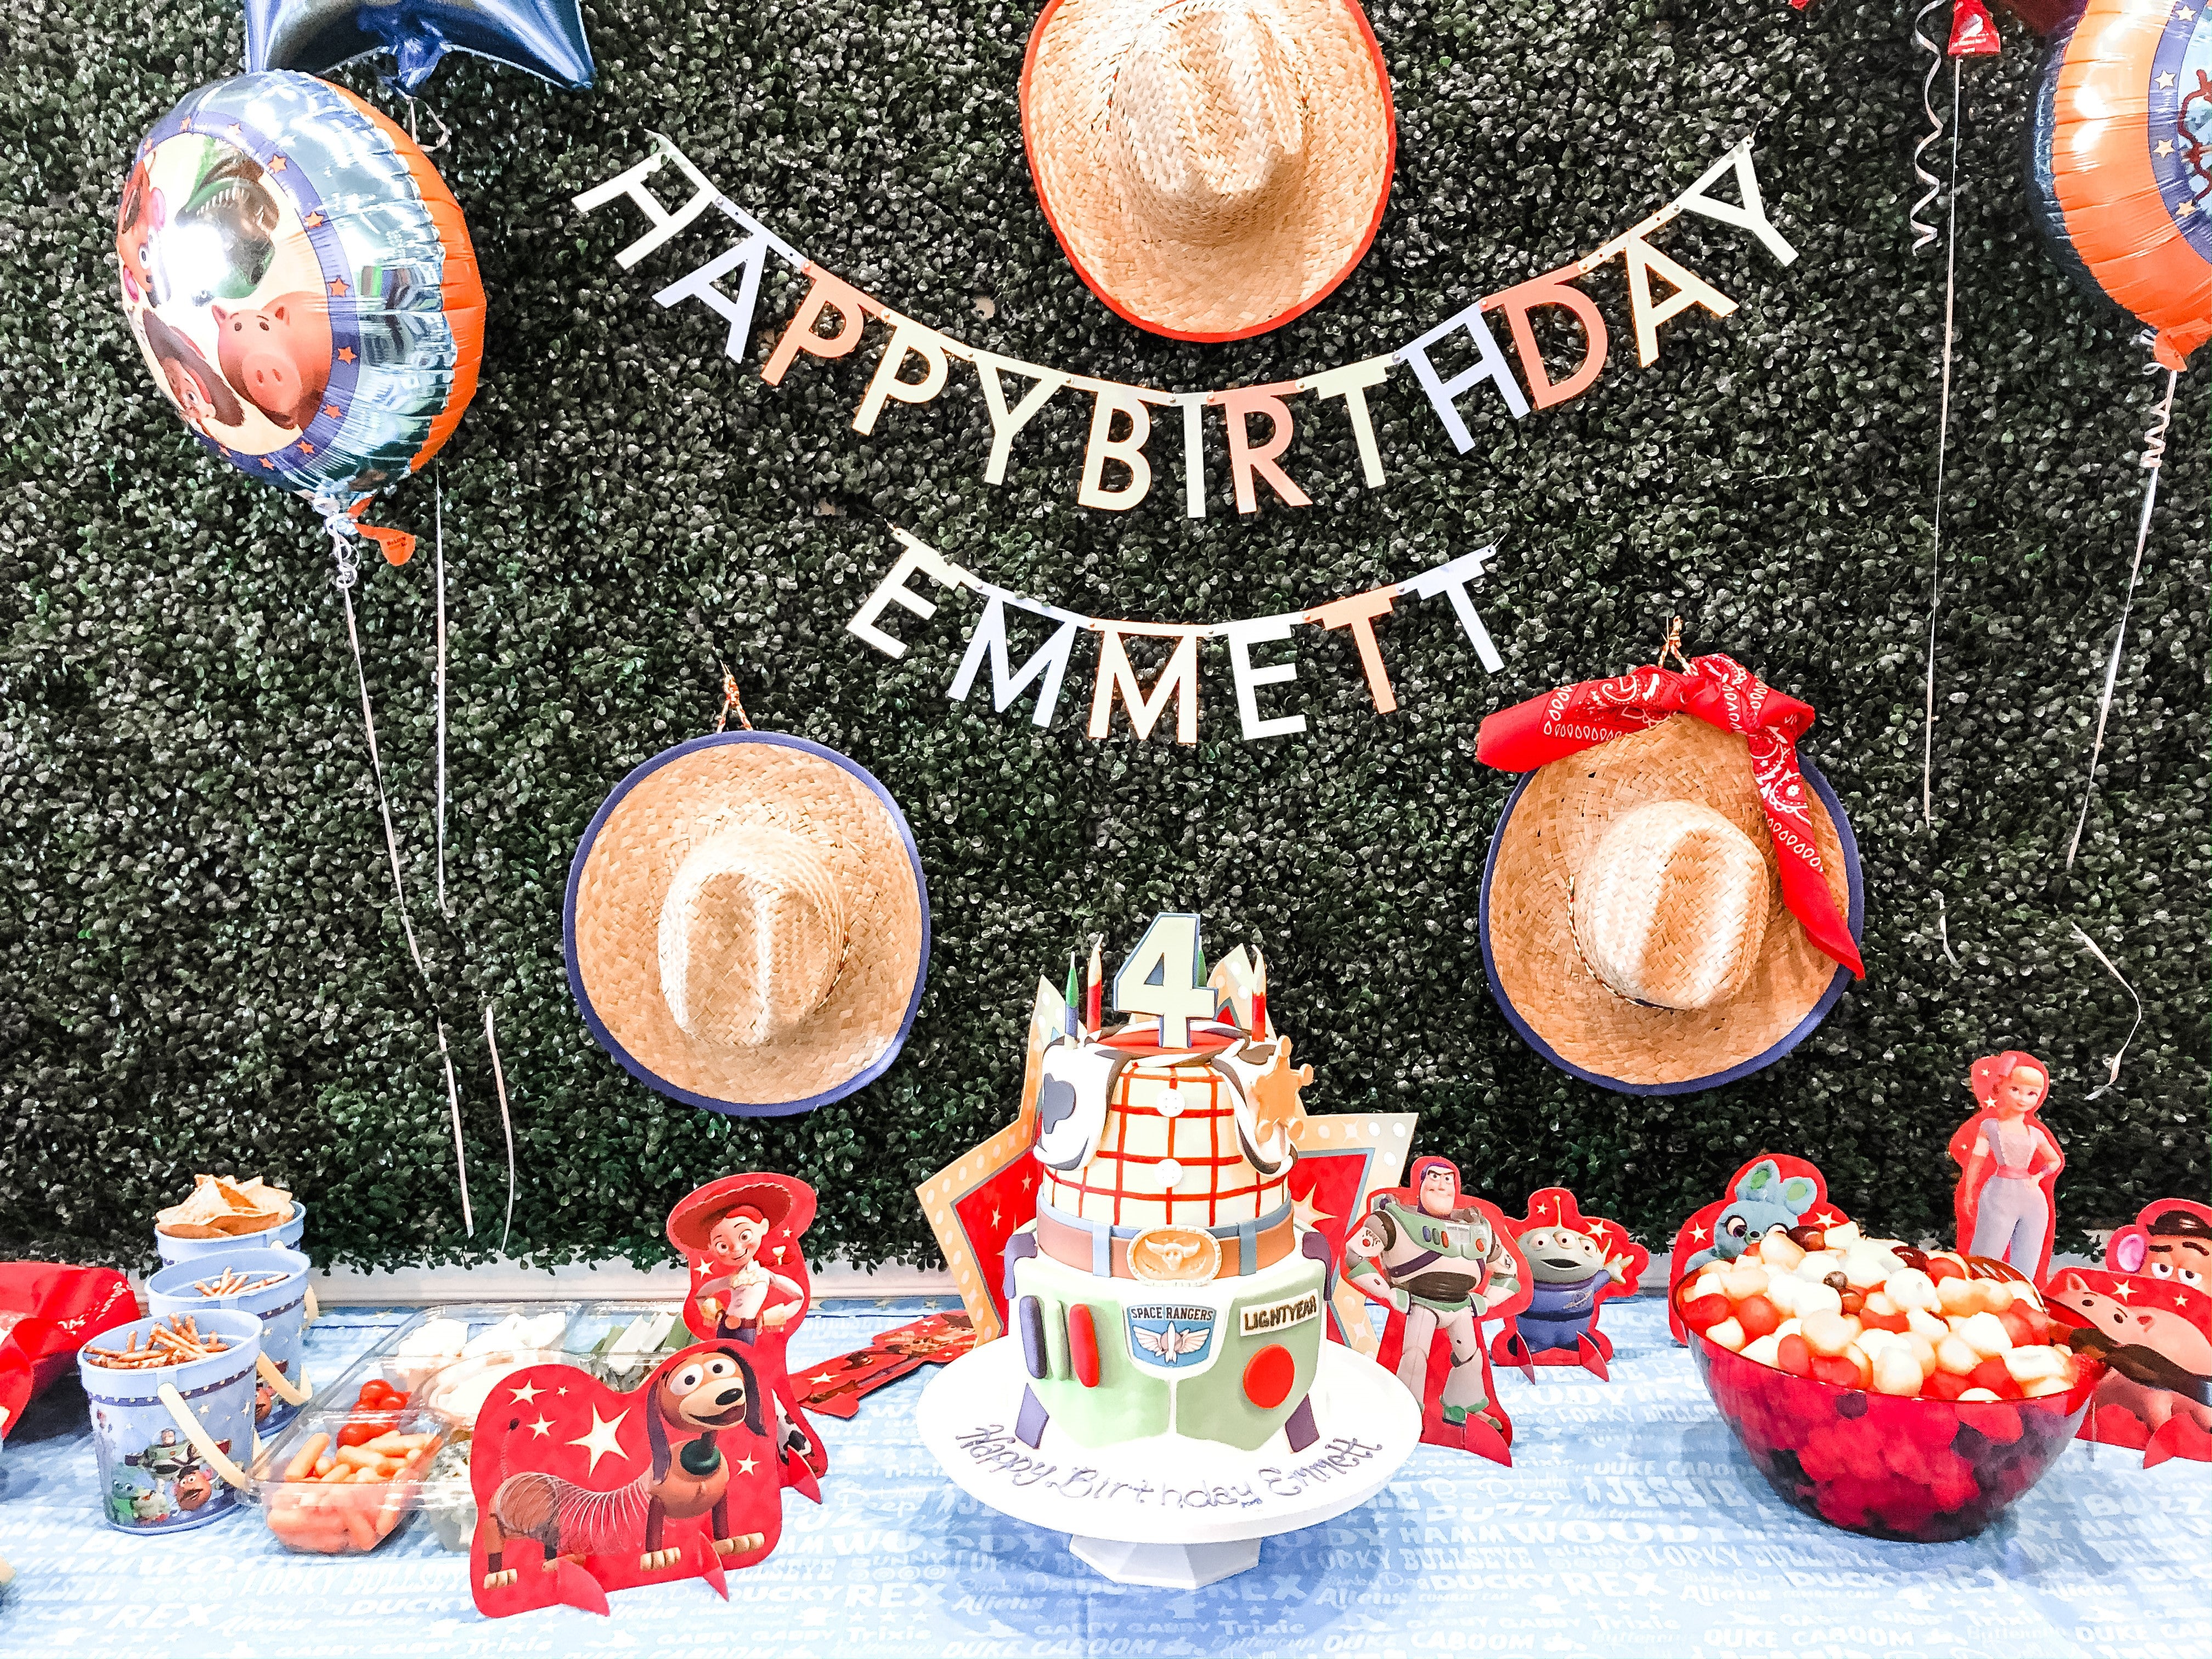 A Toy Story theme birthday party with a banner, cake, balloons, and decorations